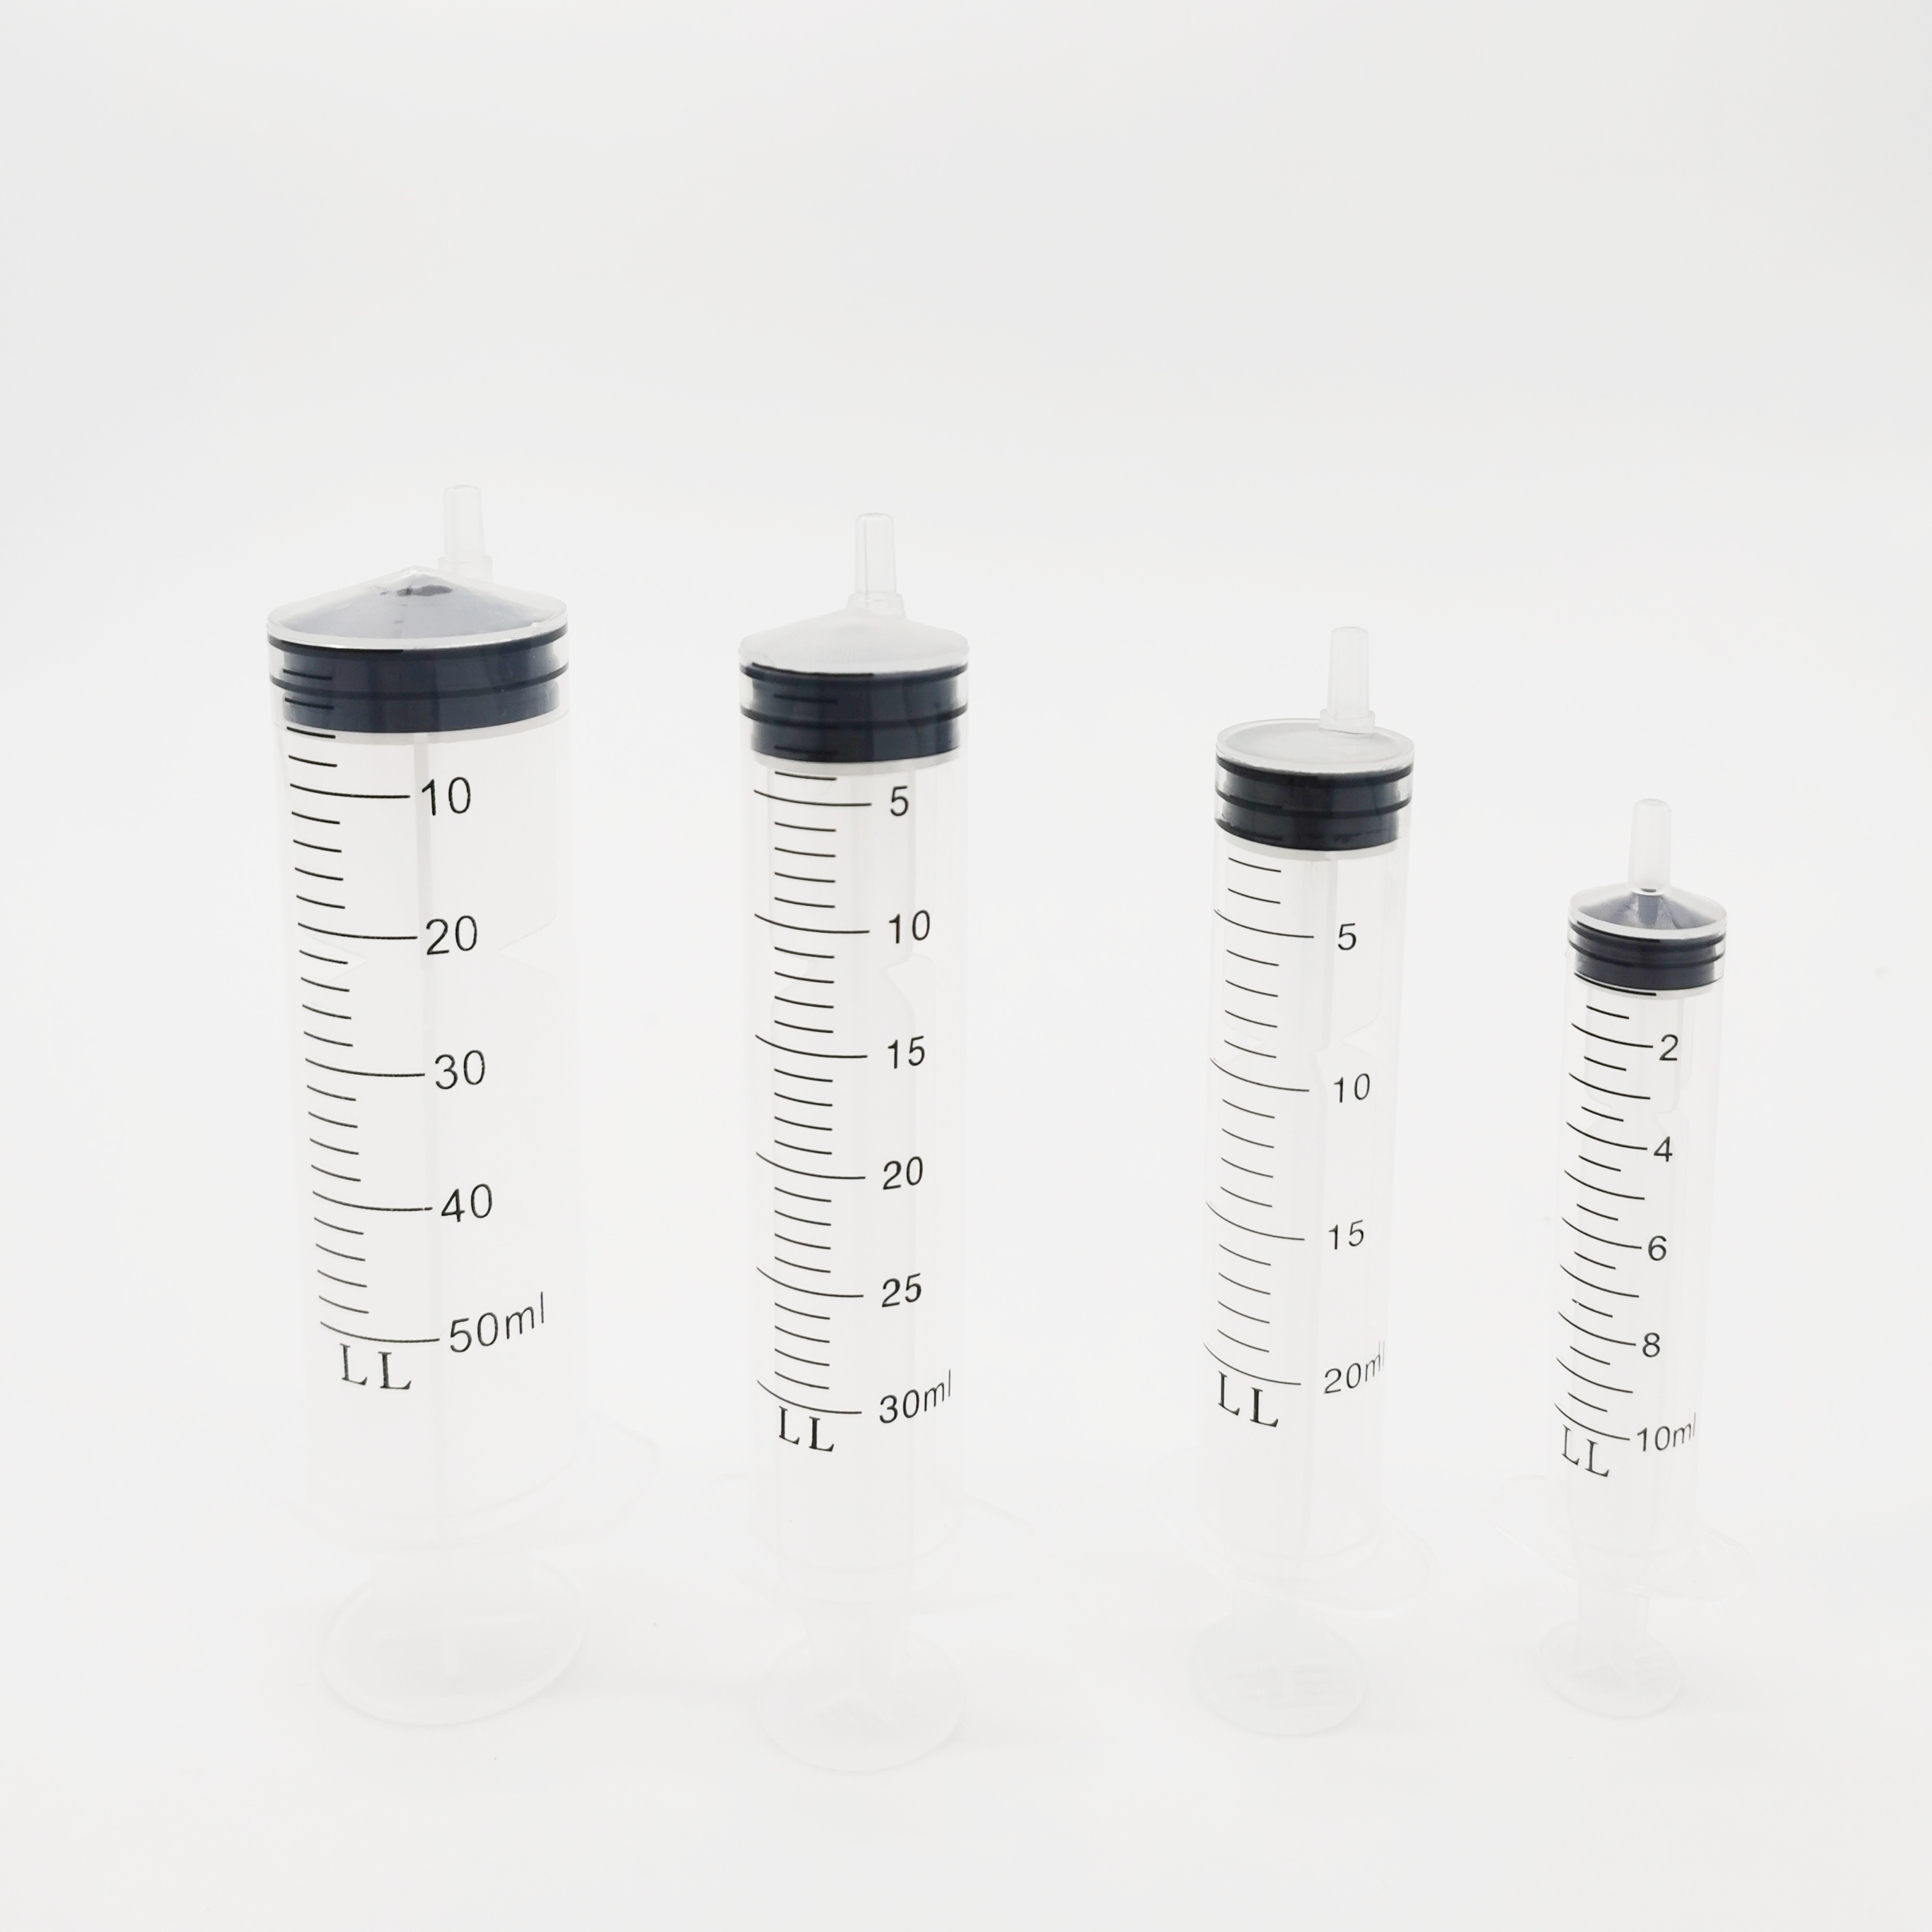 What are the different types of syringes?